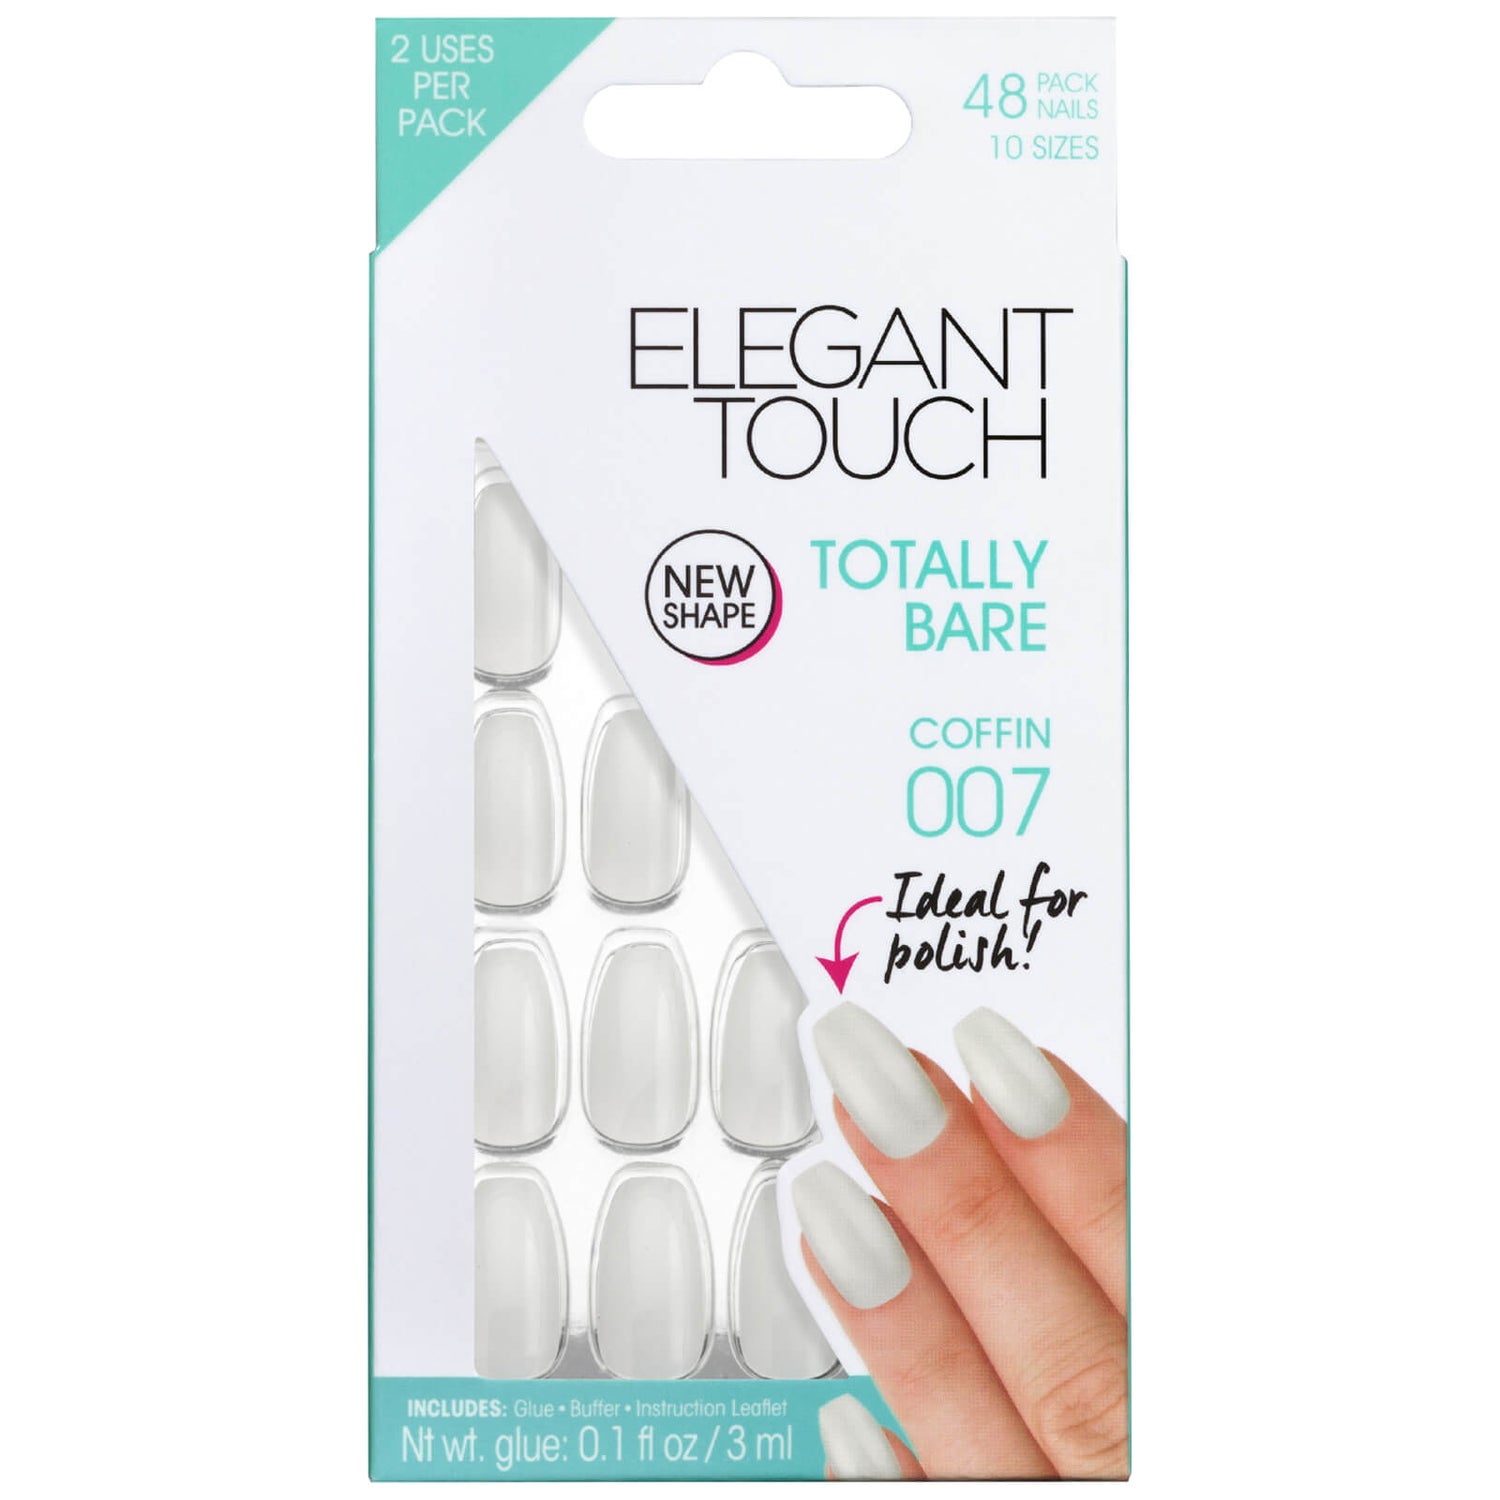 Ongles Totally Bare Elegant Touch – Coffin 007